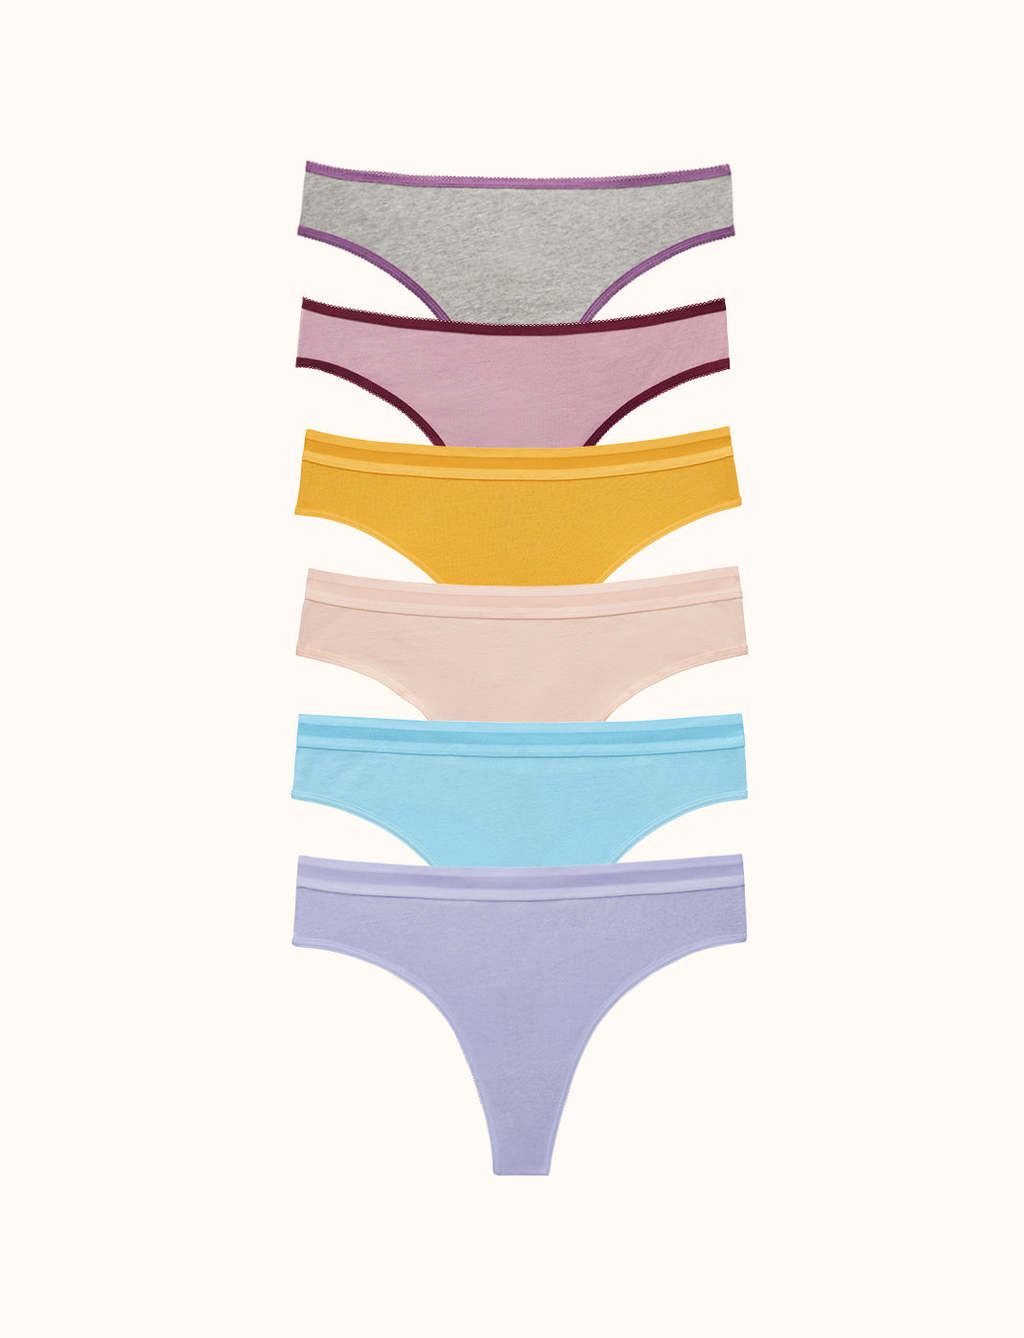 20 Of The Best Undergarments For Women &Amp; Men To To Keep You Cool This Season